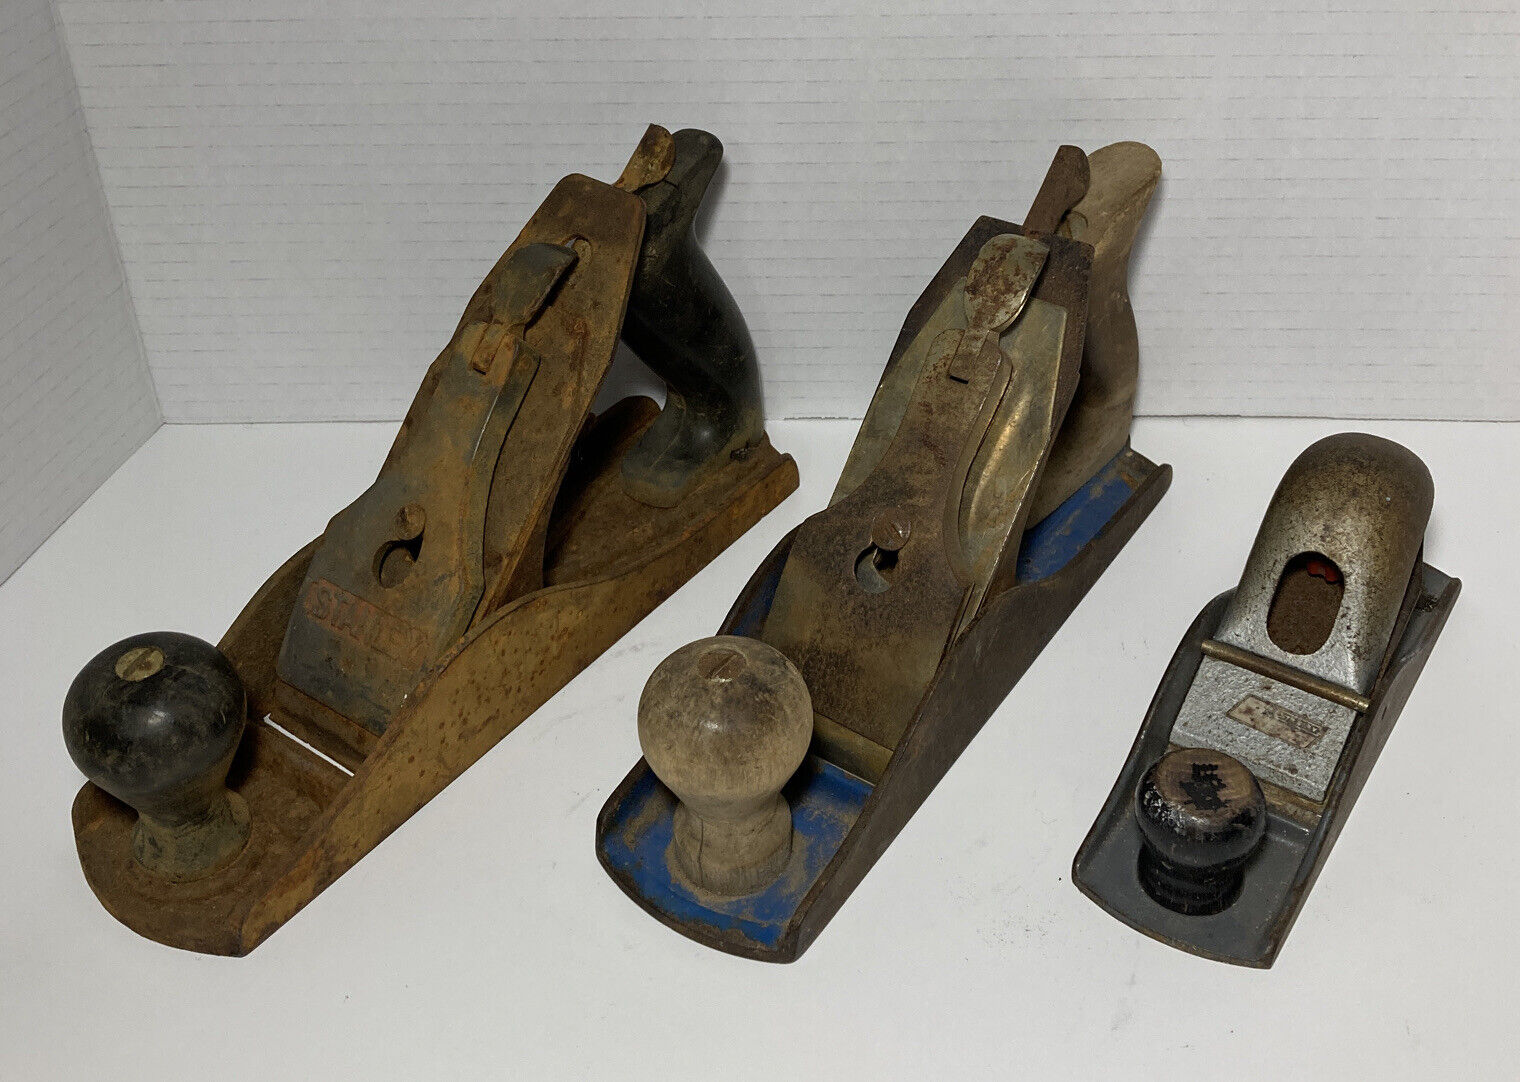 Vintage Stanley Made In USA Wood Working Plane Tools Lot of 3 for Restoration